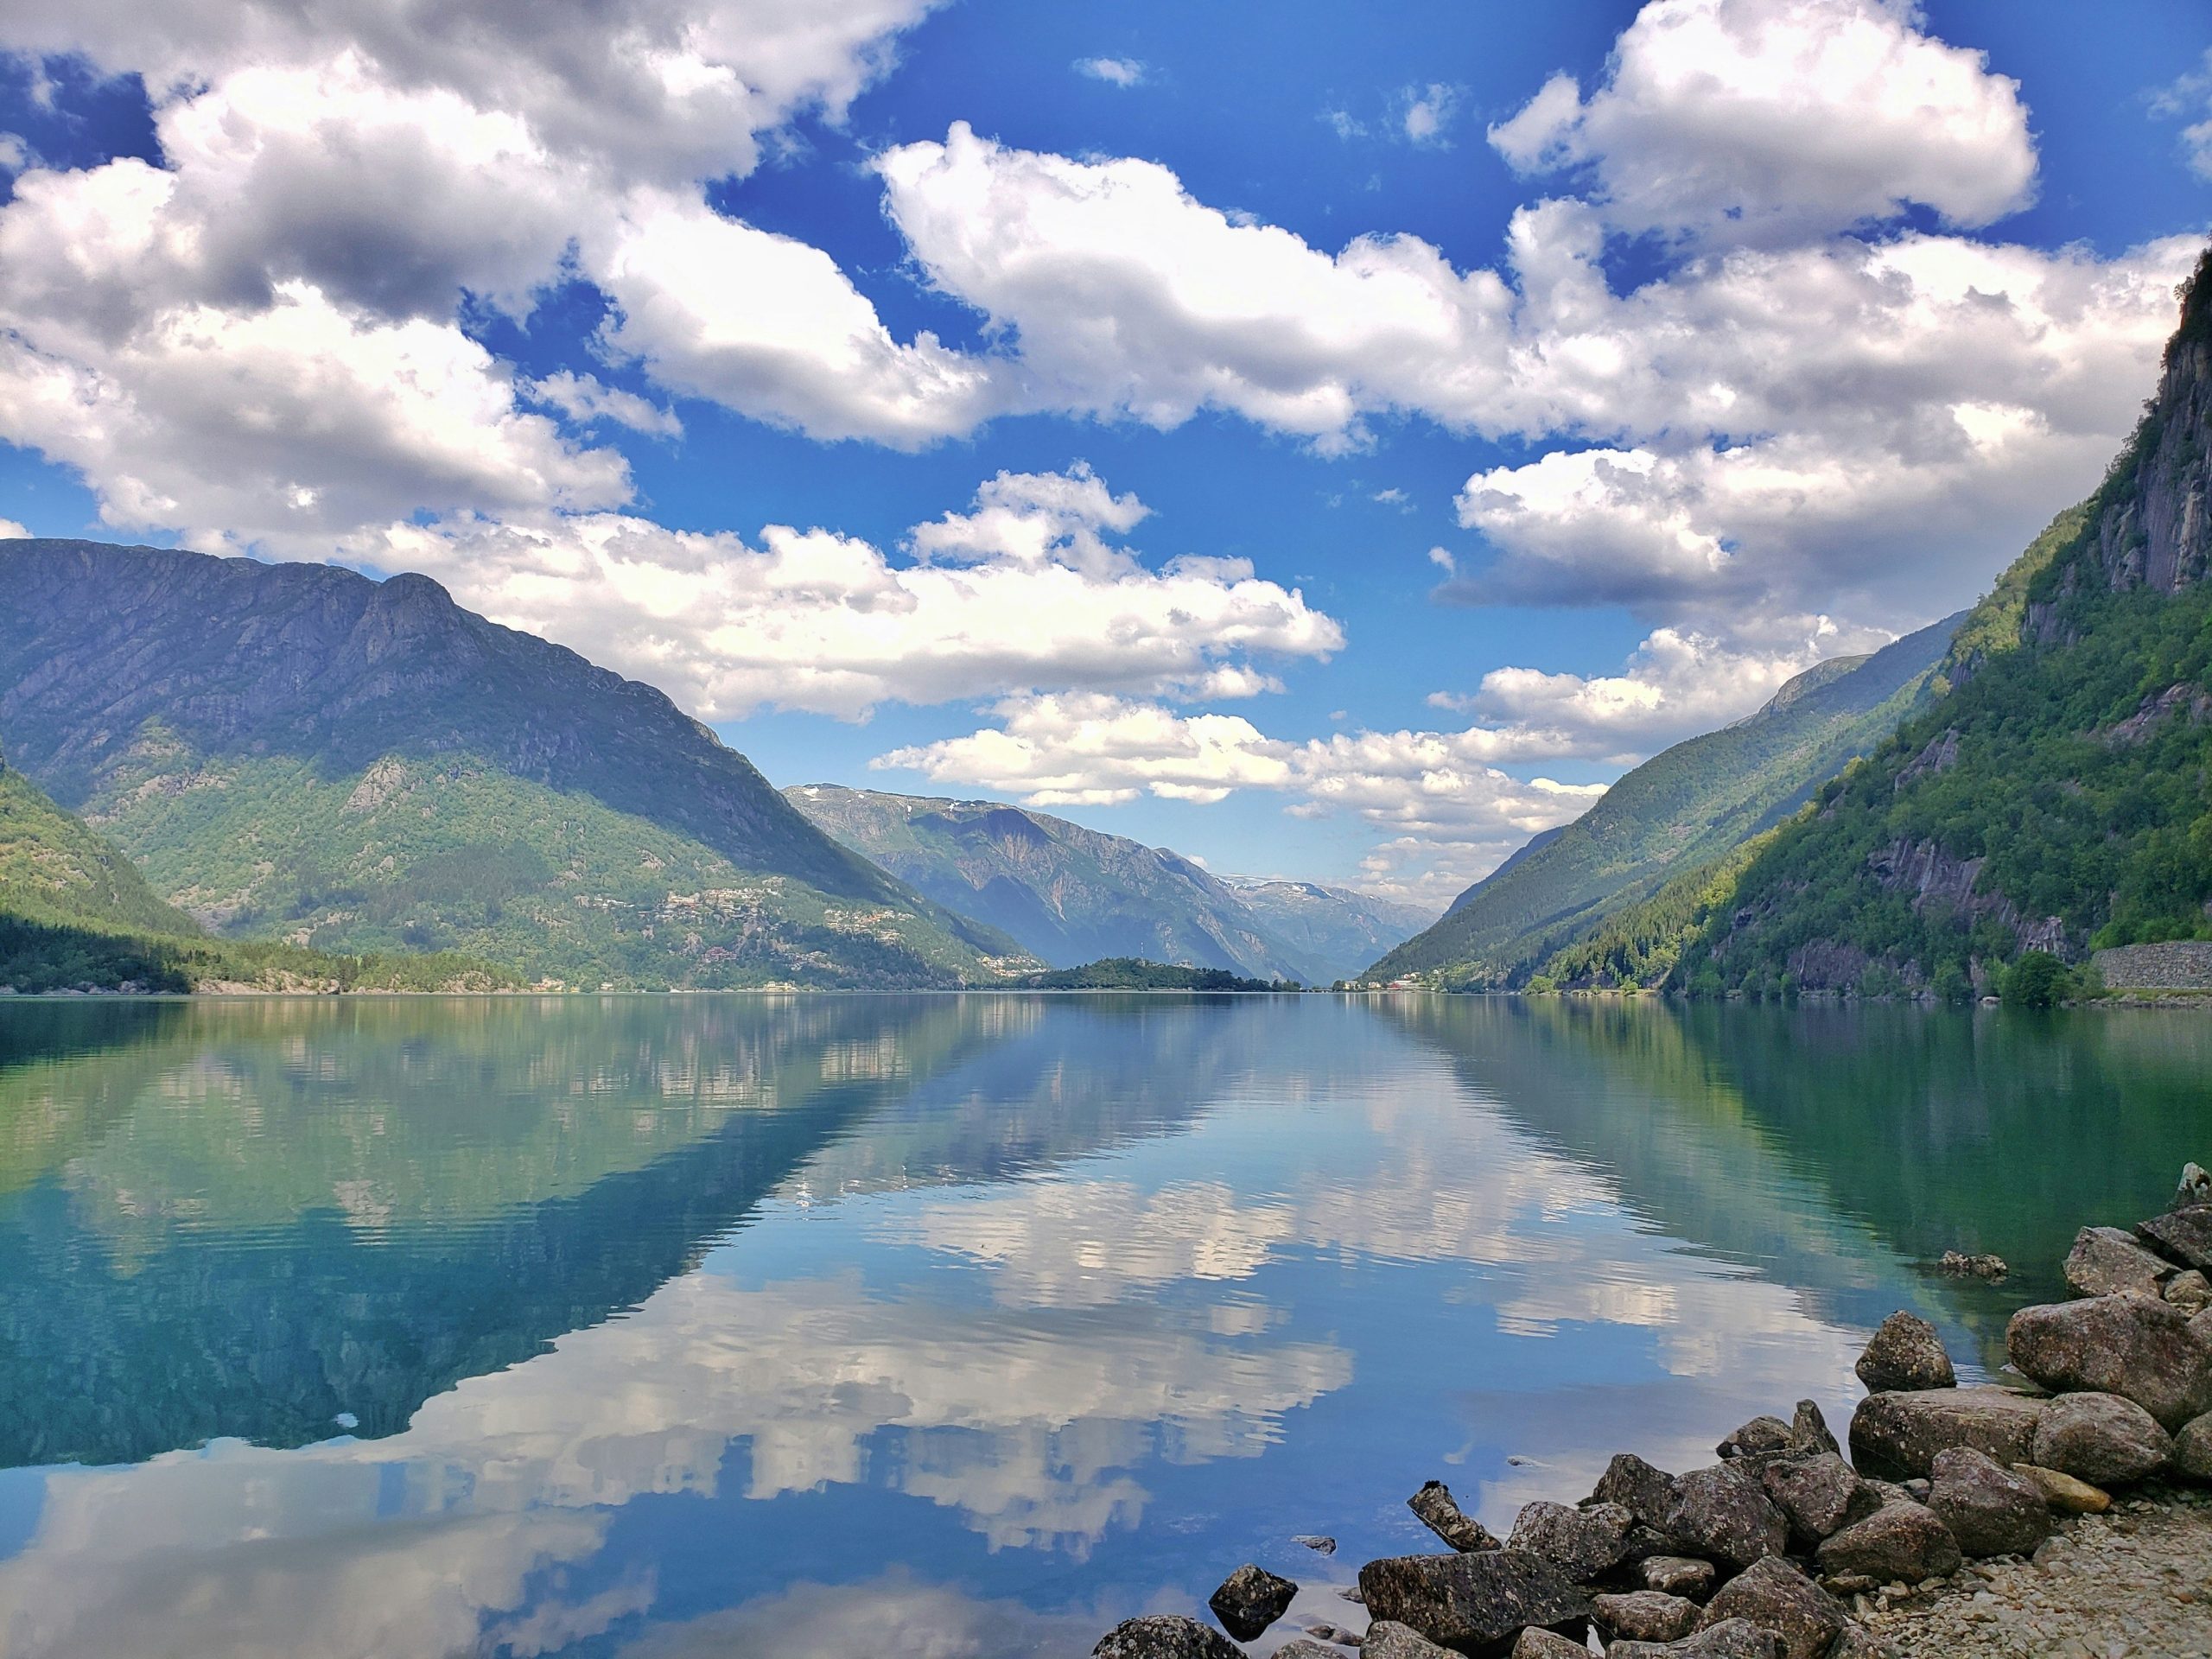 explore the breathtaking beauty of fjords and experience an unforgettable journey through stunning landscapes.